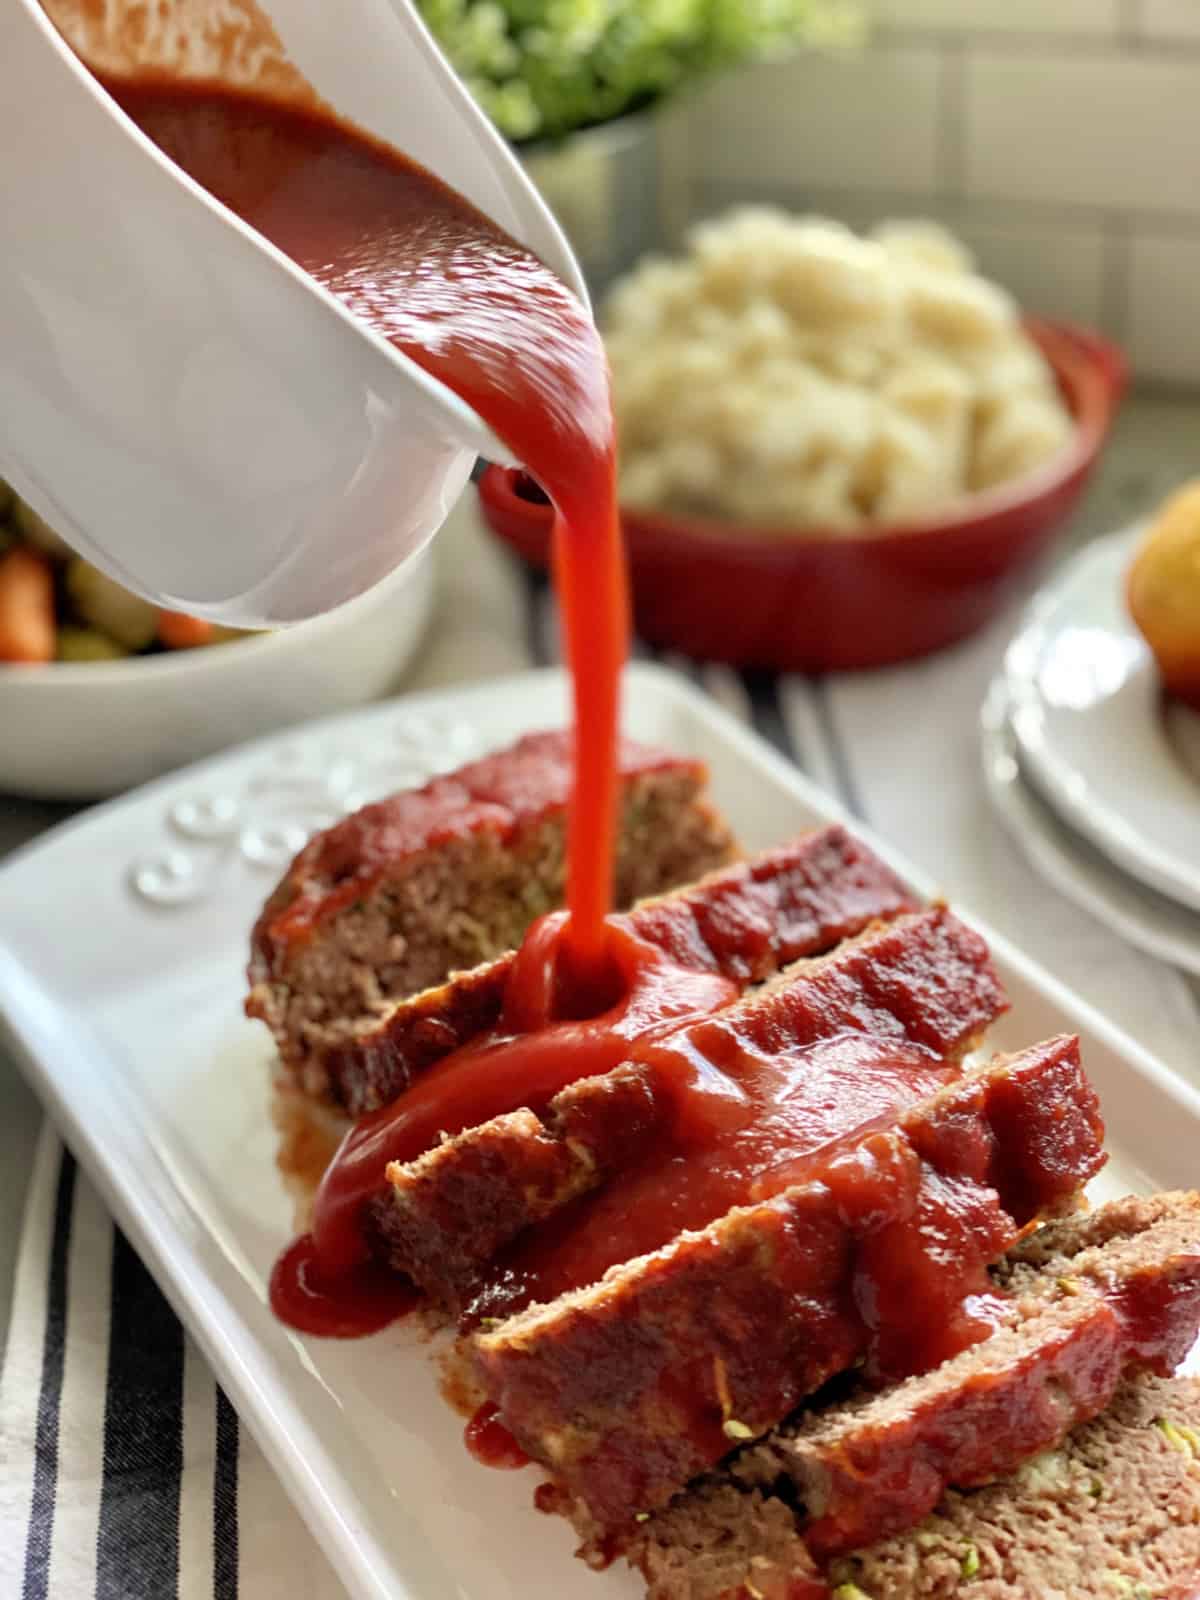 White gravy boat pouring red sauce on top of sliced meatloaf.